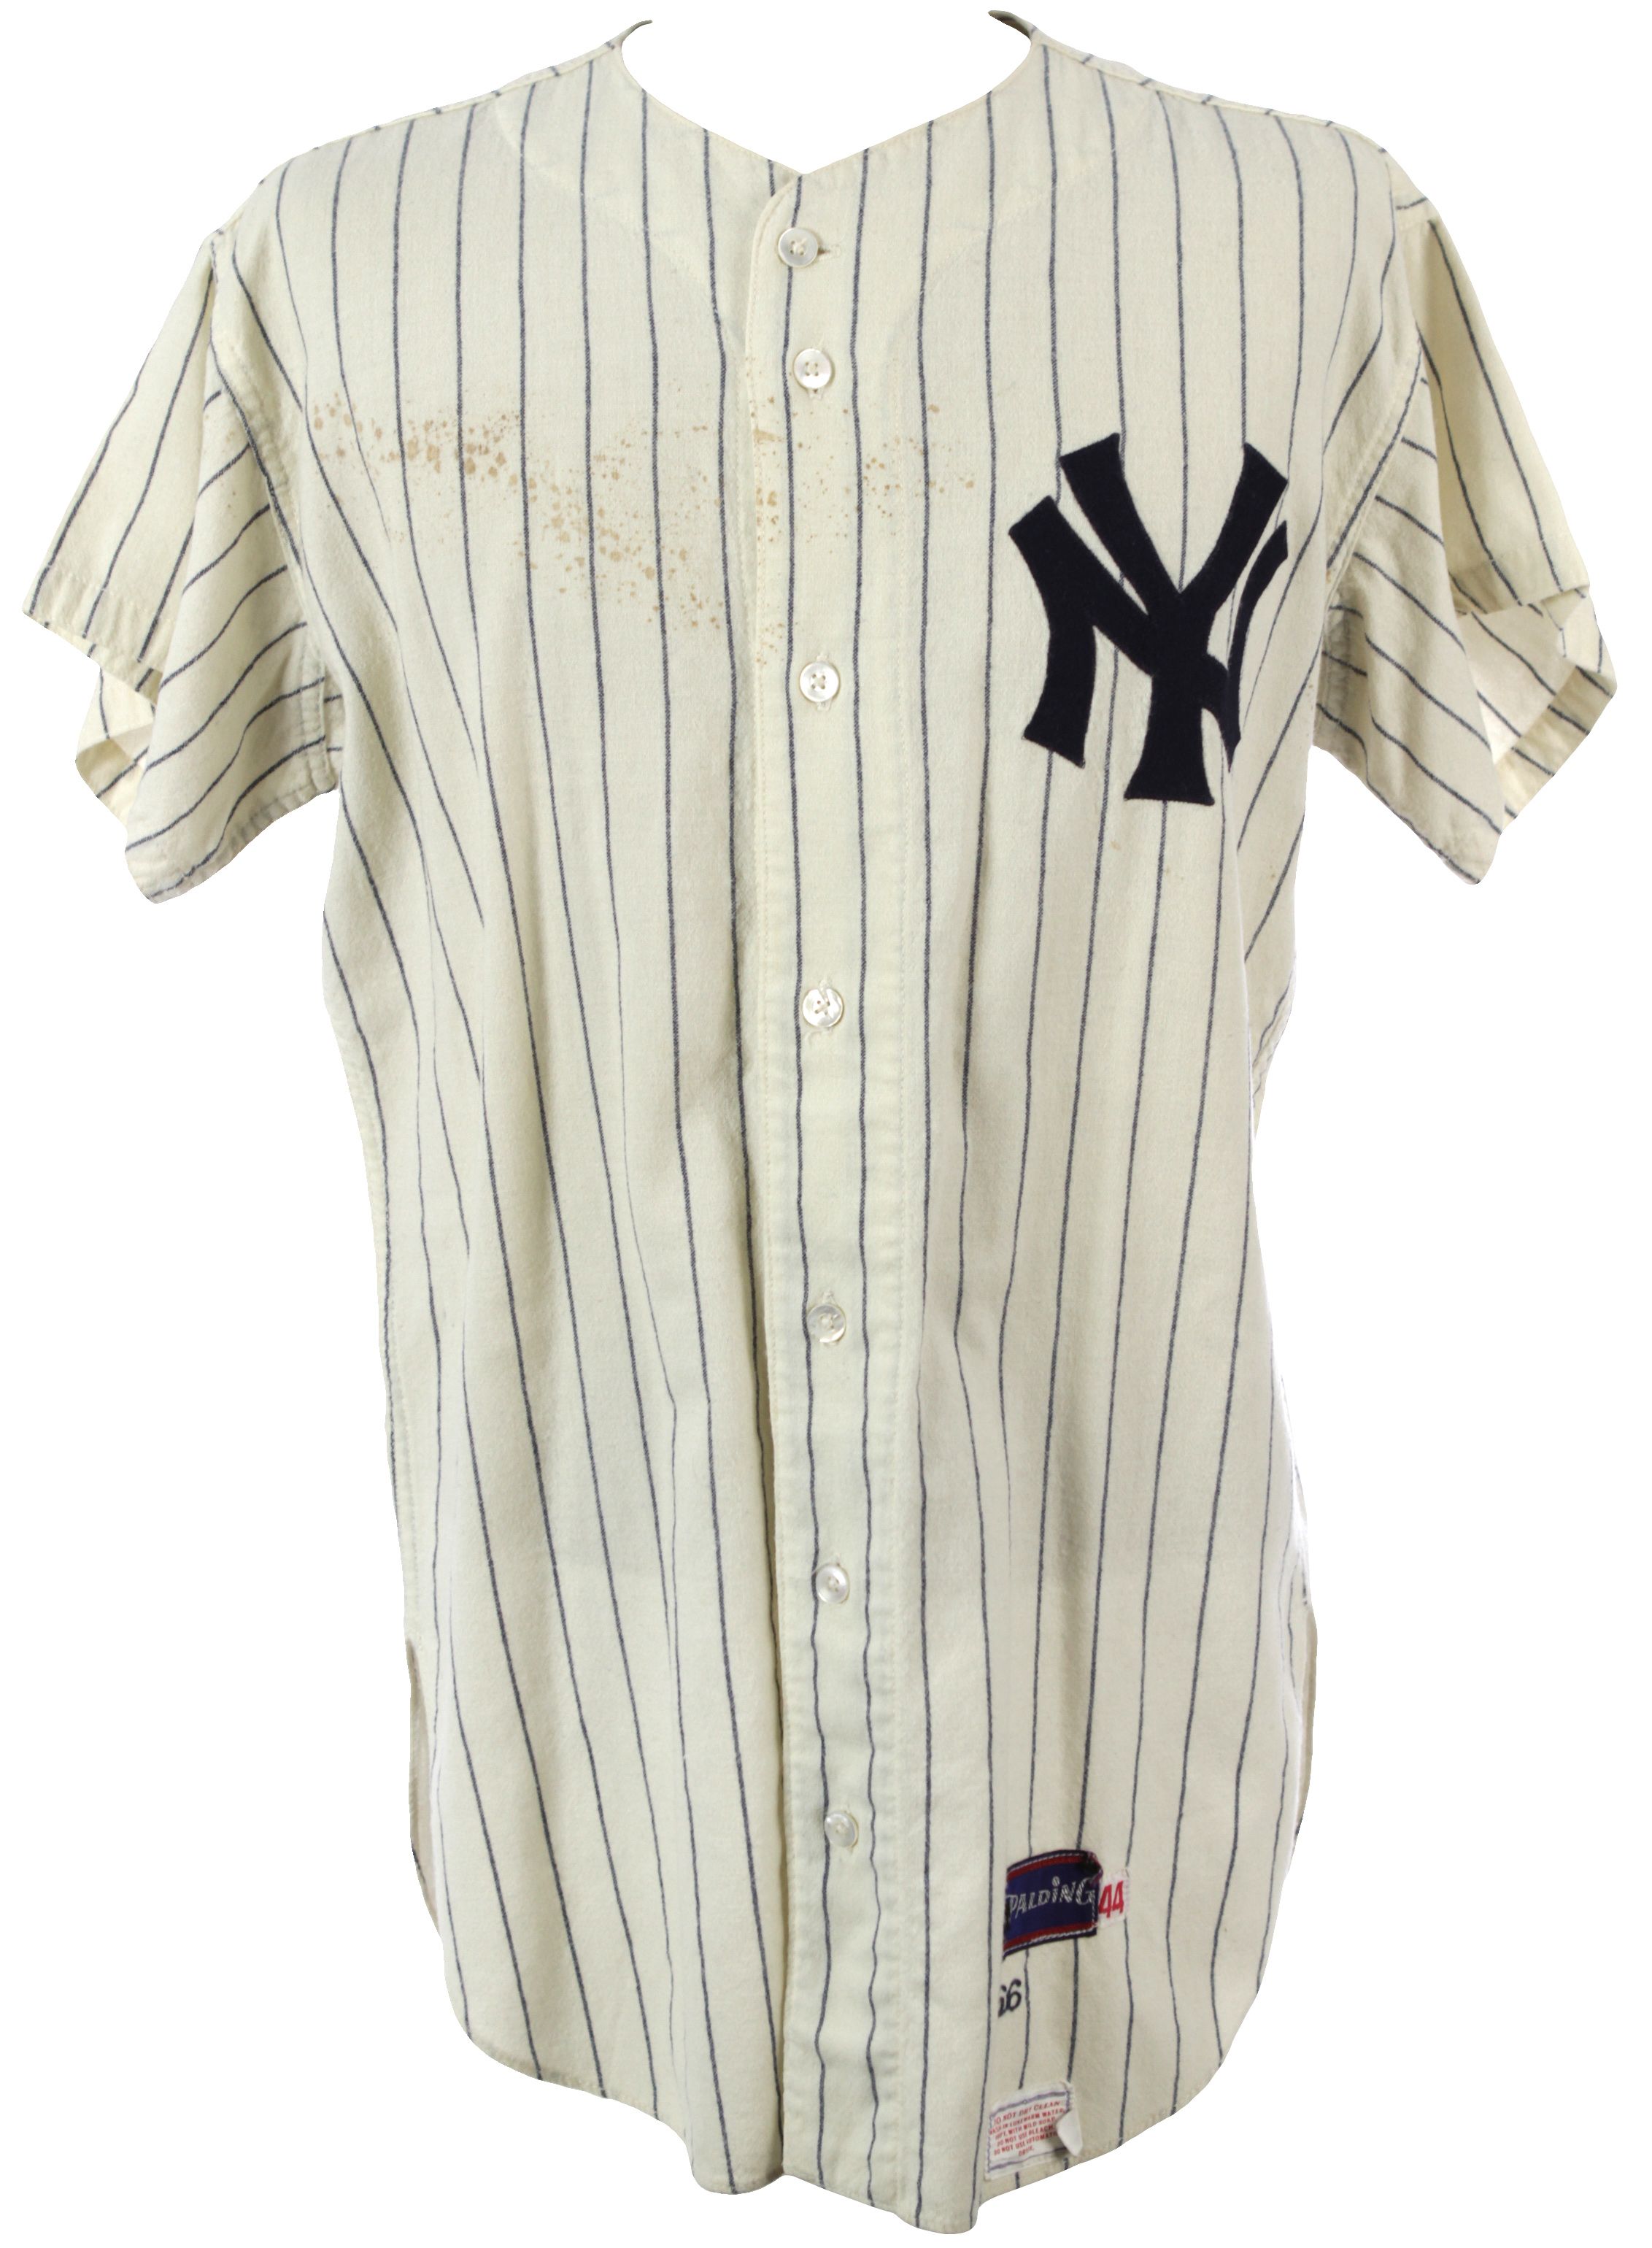 Mickey Mantle's final game-worn New York Yankees jersey 